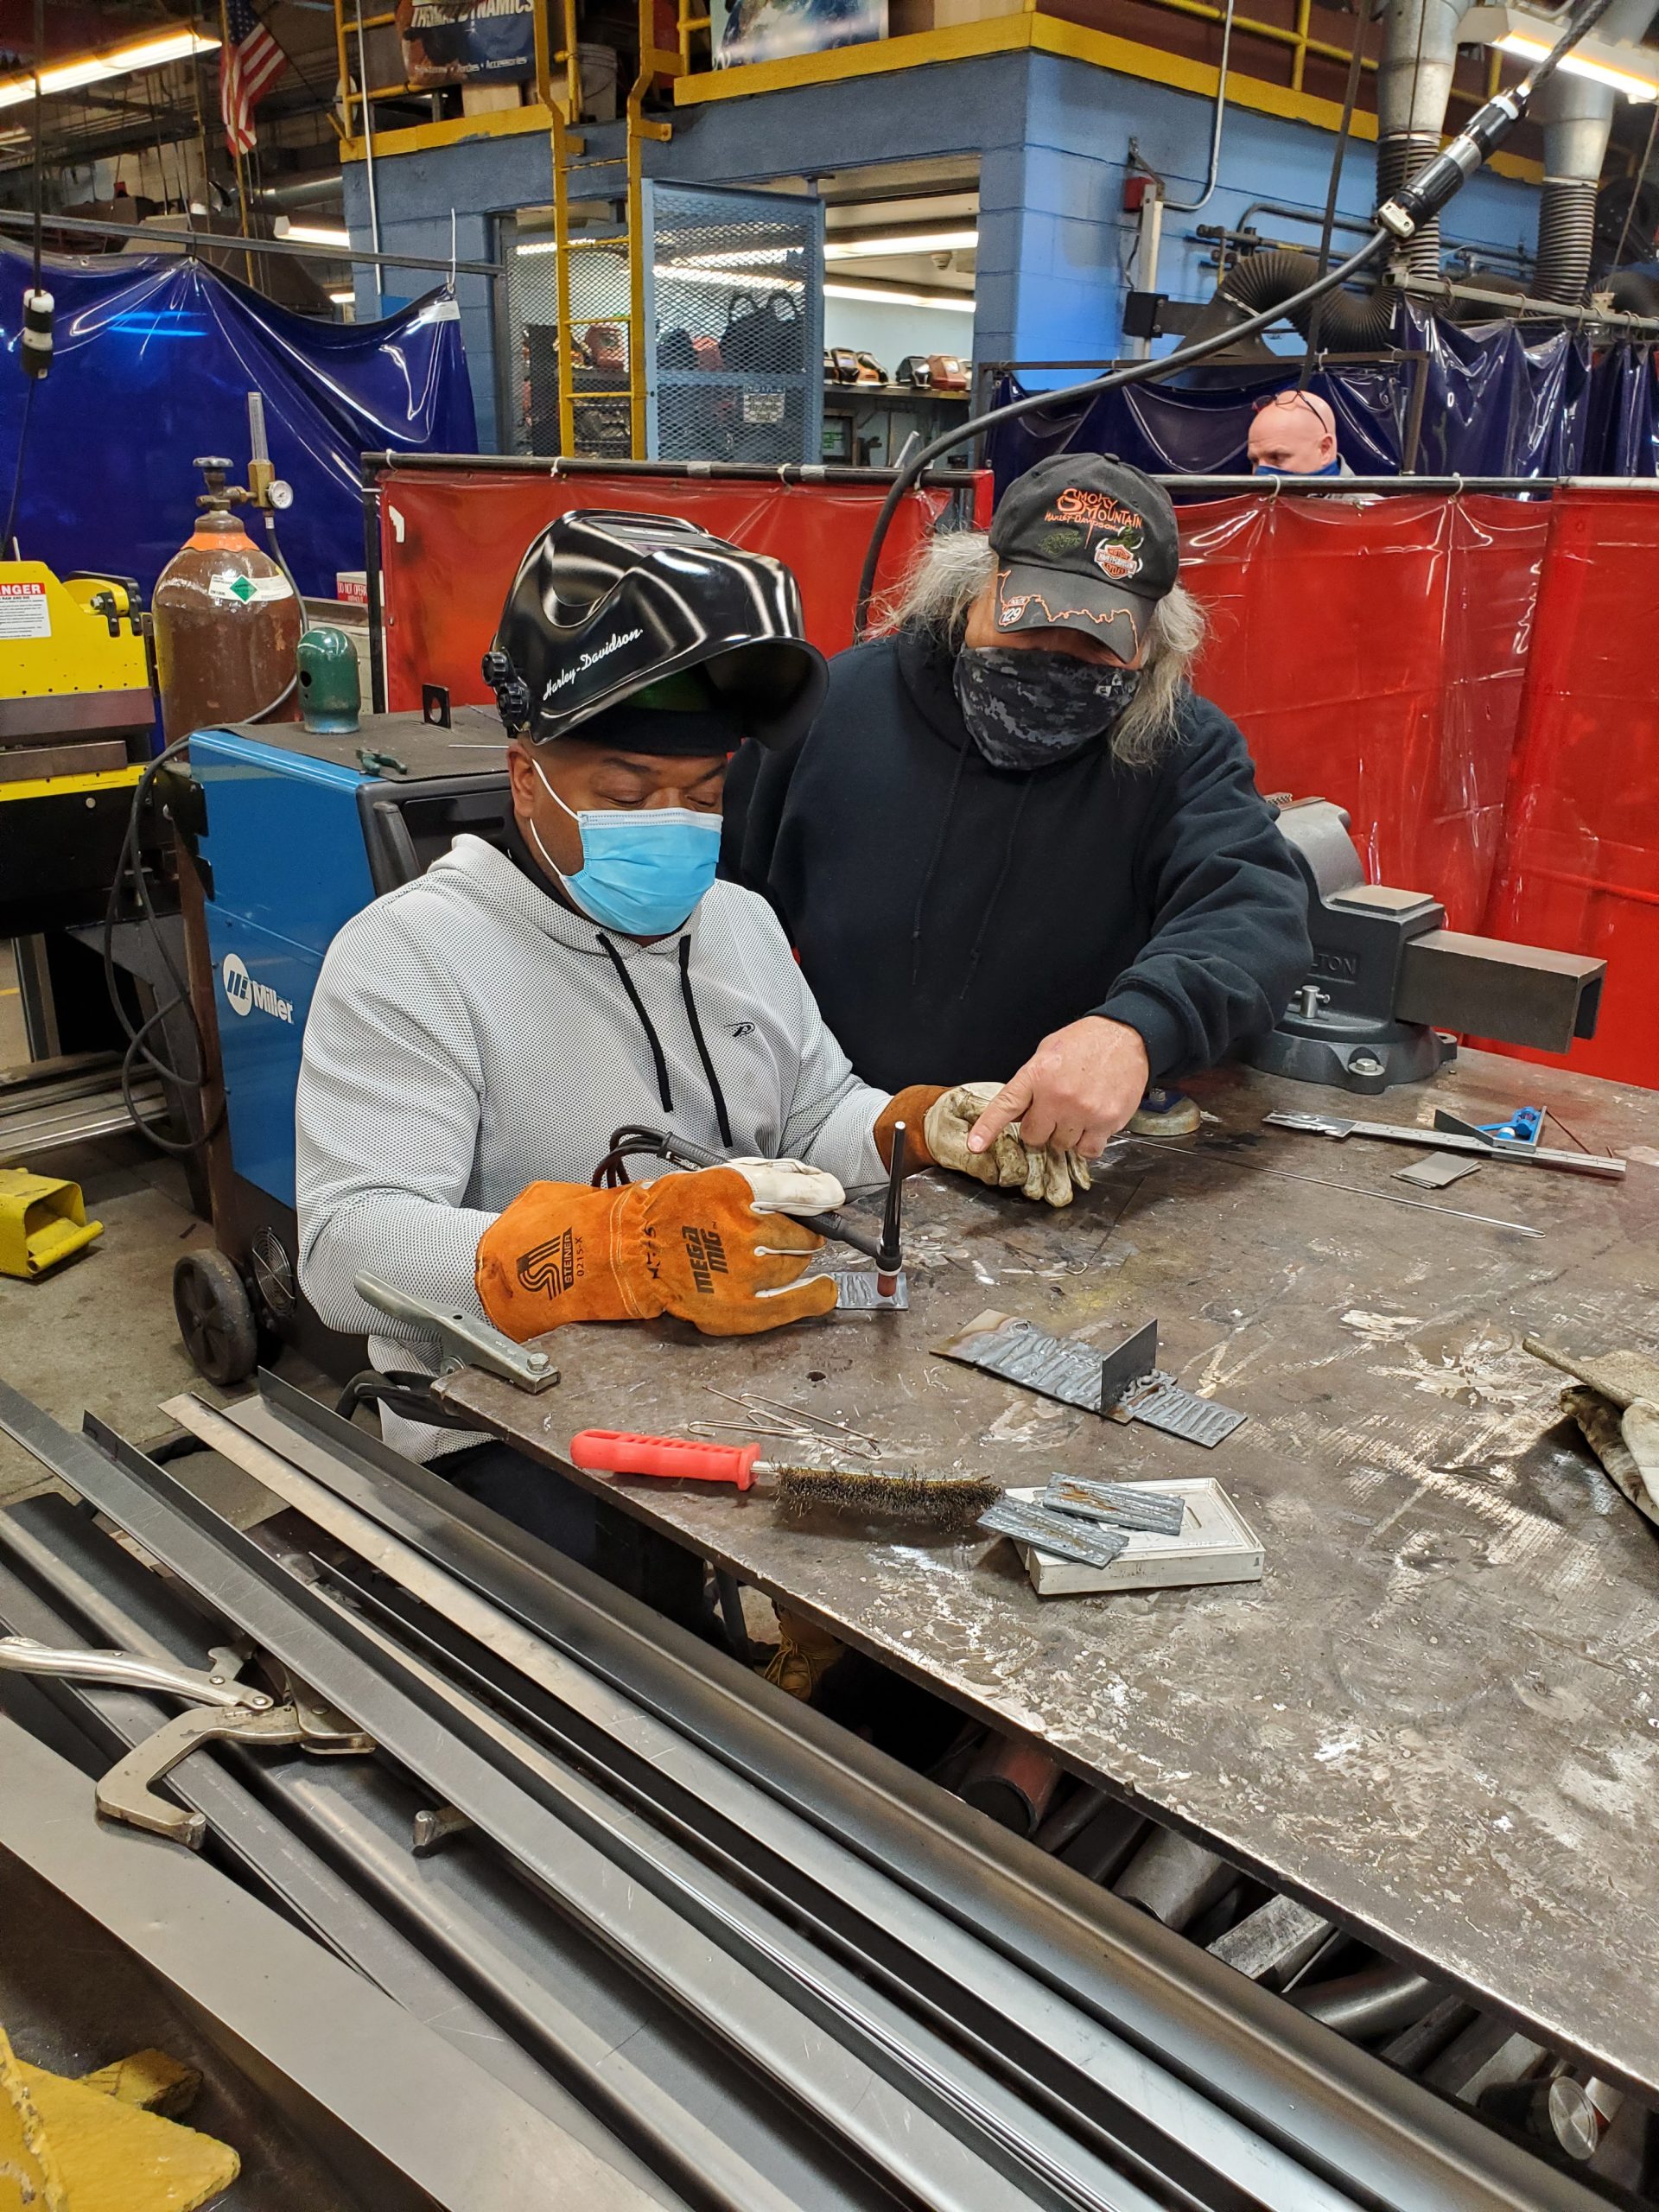 Mig Tig Welding Class student works with instructor on a project